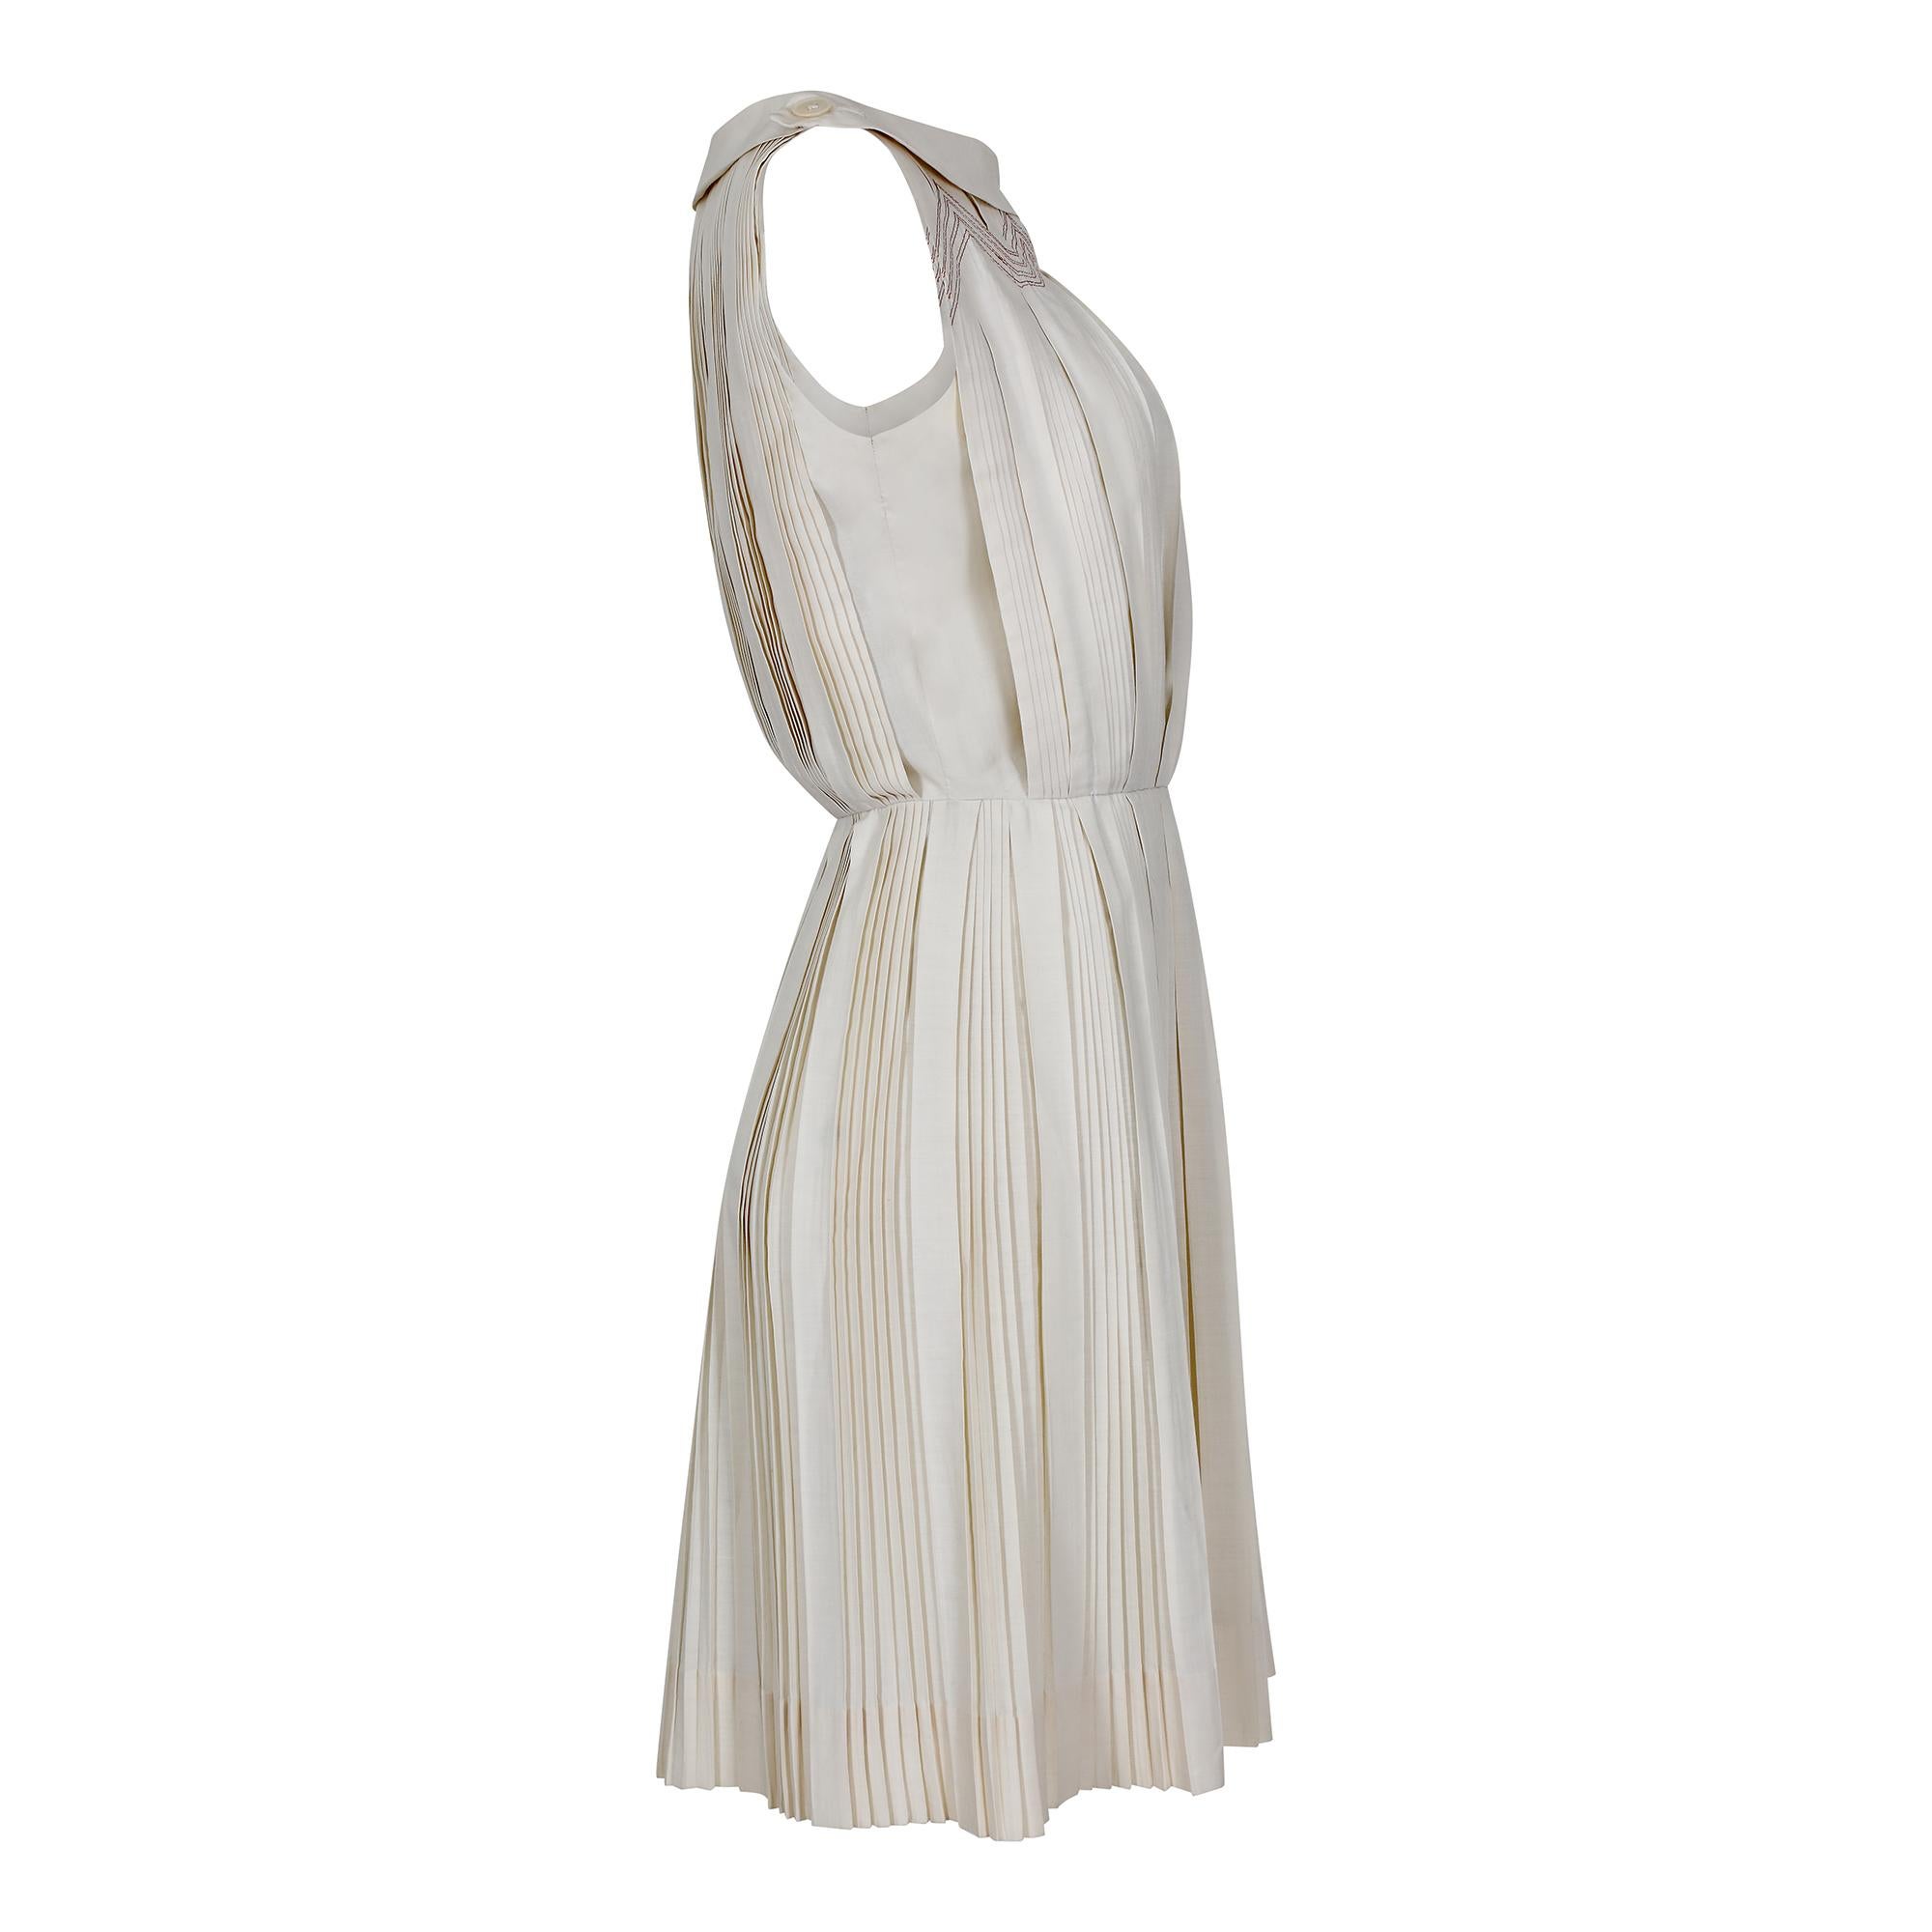 A classic example of good quality American day wear. We love this label - Carlye pieces just ooze refinment. This creamy beige cotton knife pleat dress has an elegent scoop neck augmented with 2 pearlescent buttons.  These fasten on the shoulders